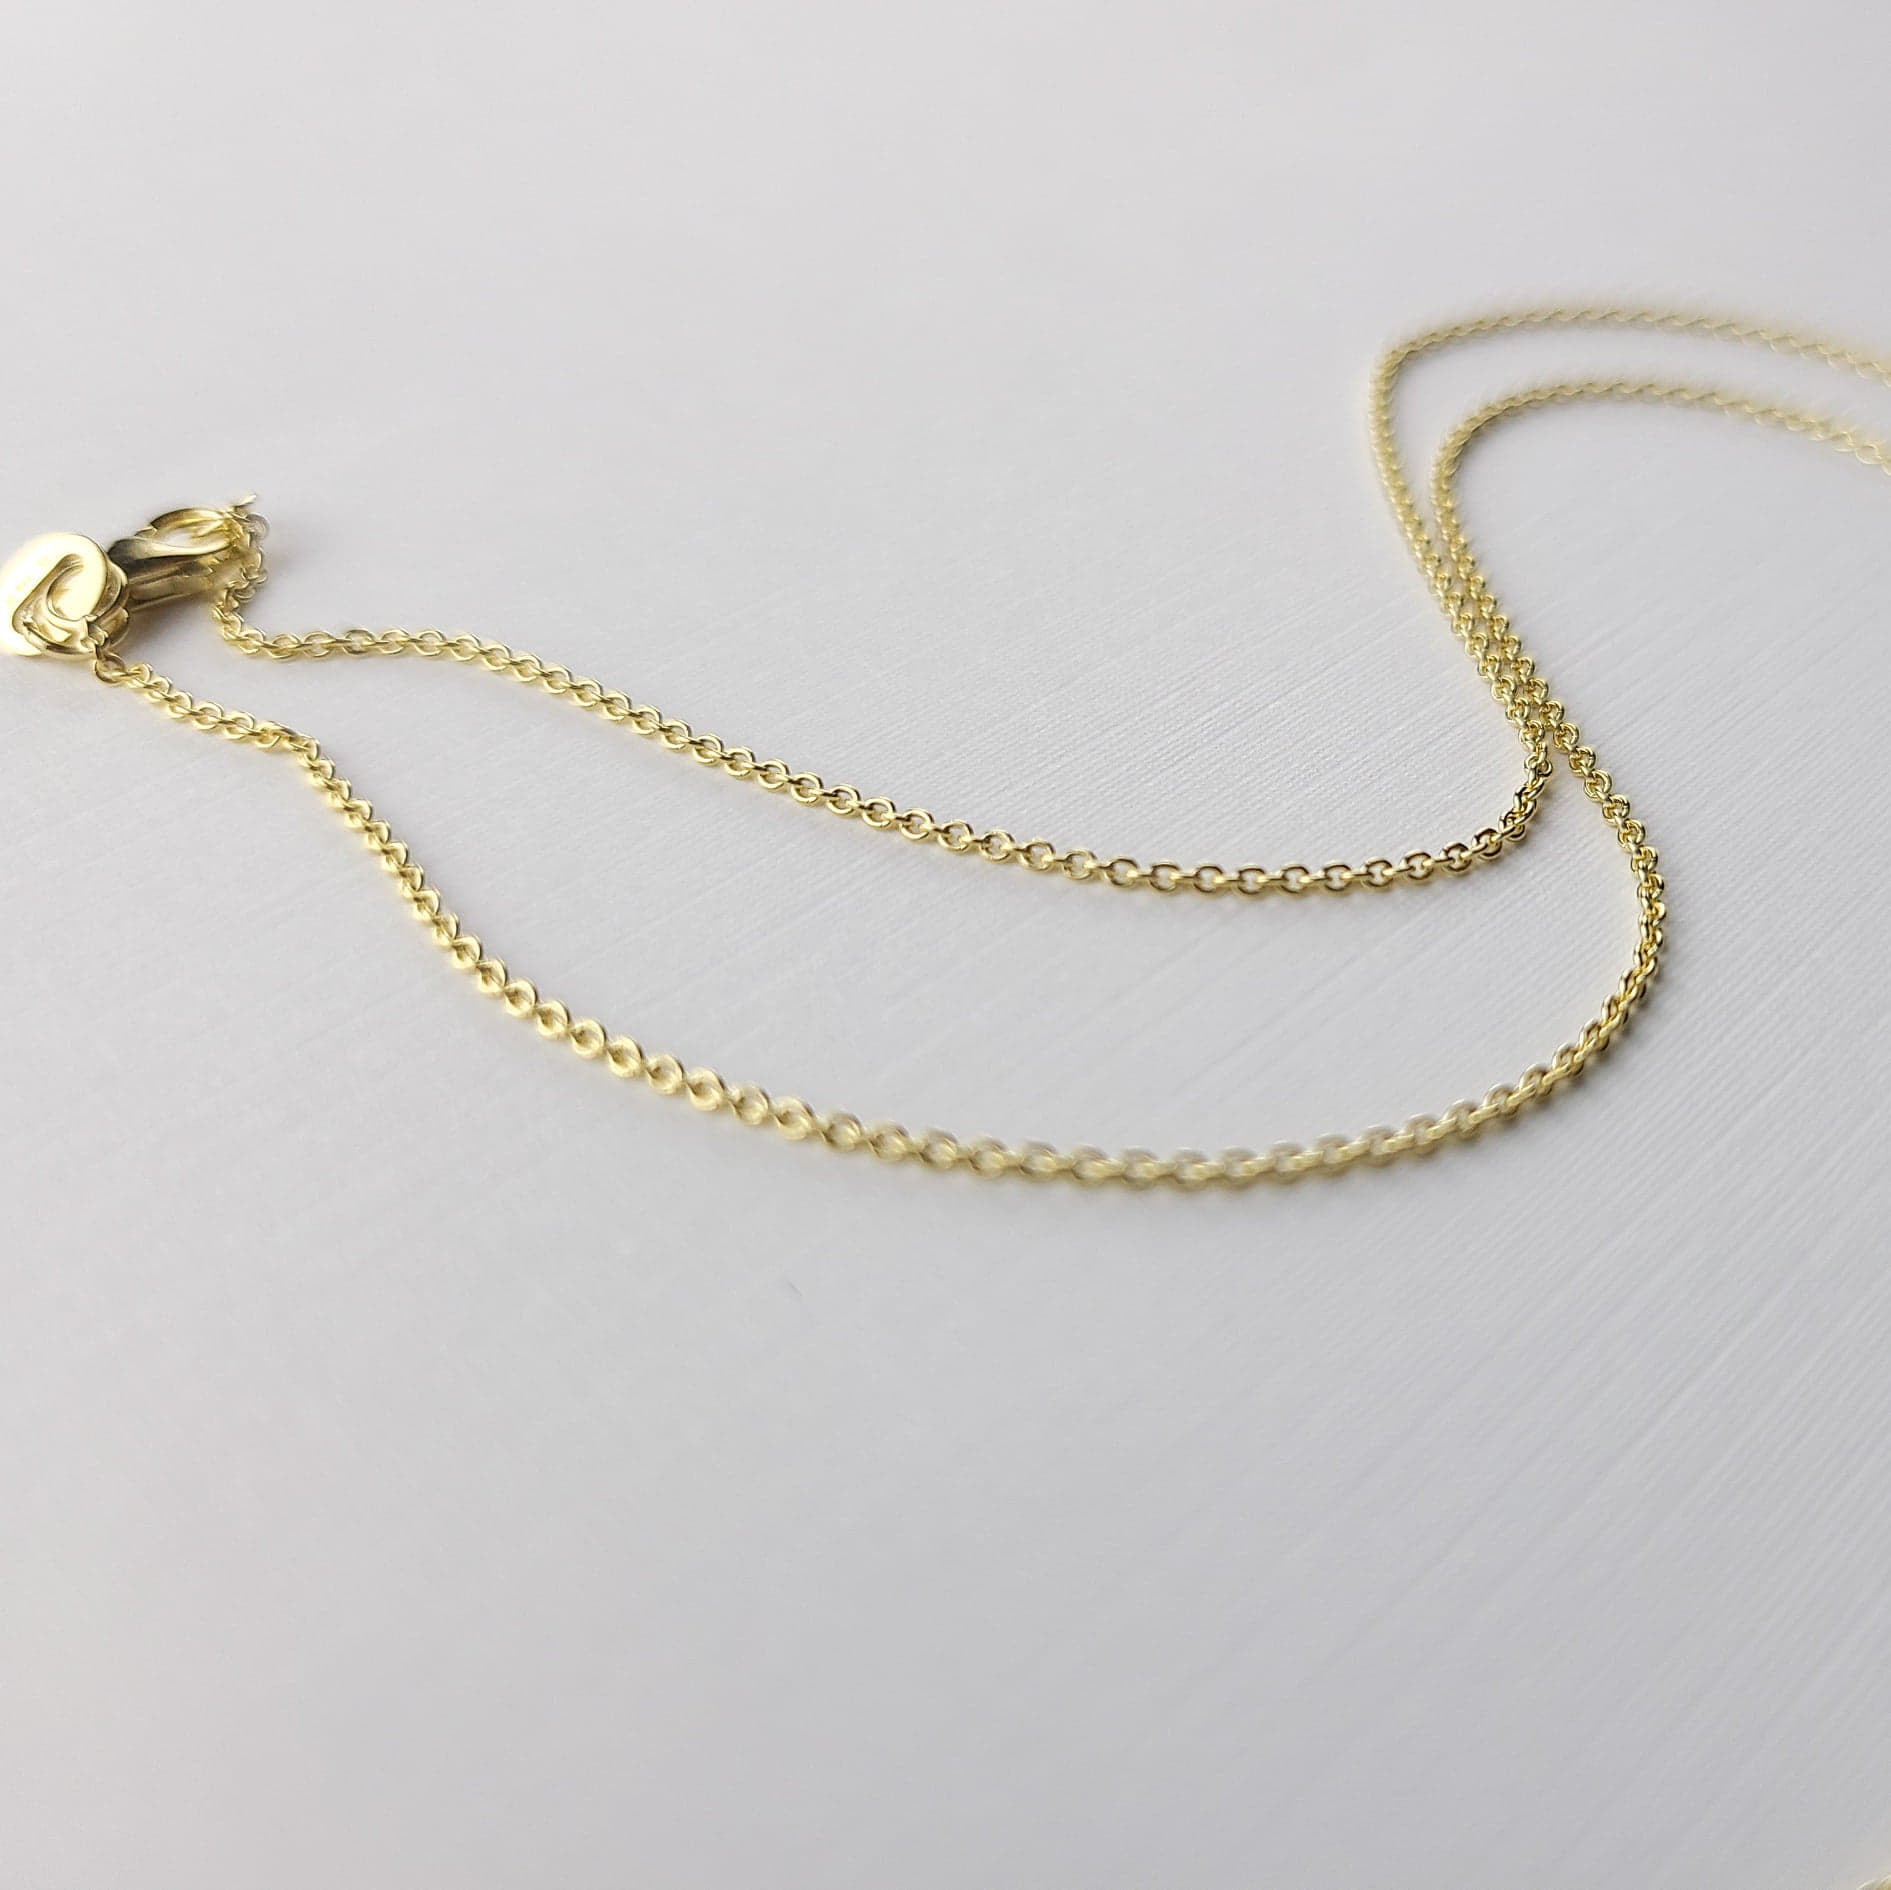 Yellow Gold Cable Chain 10K - 14K